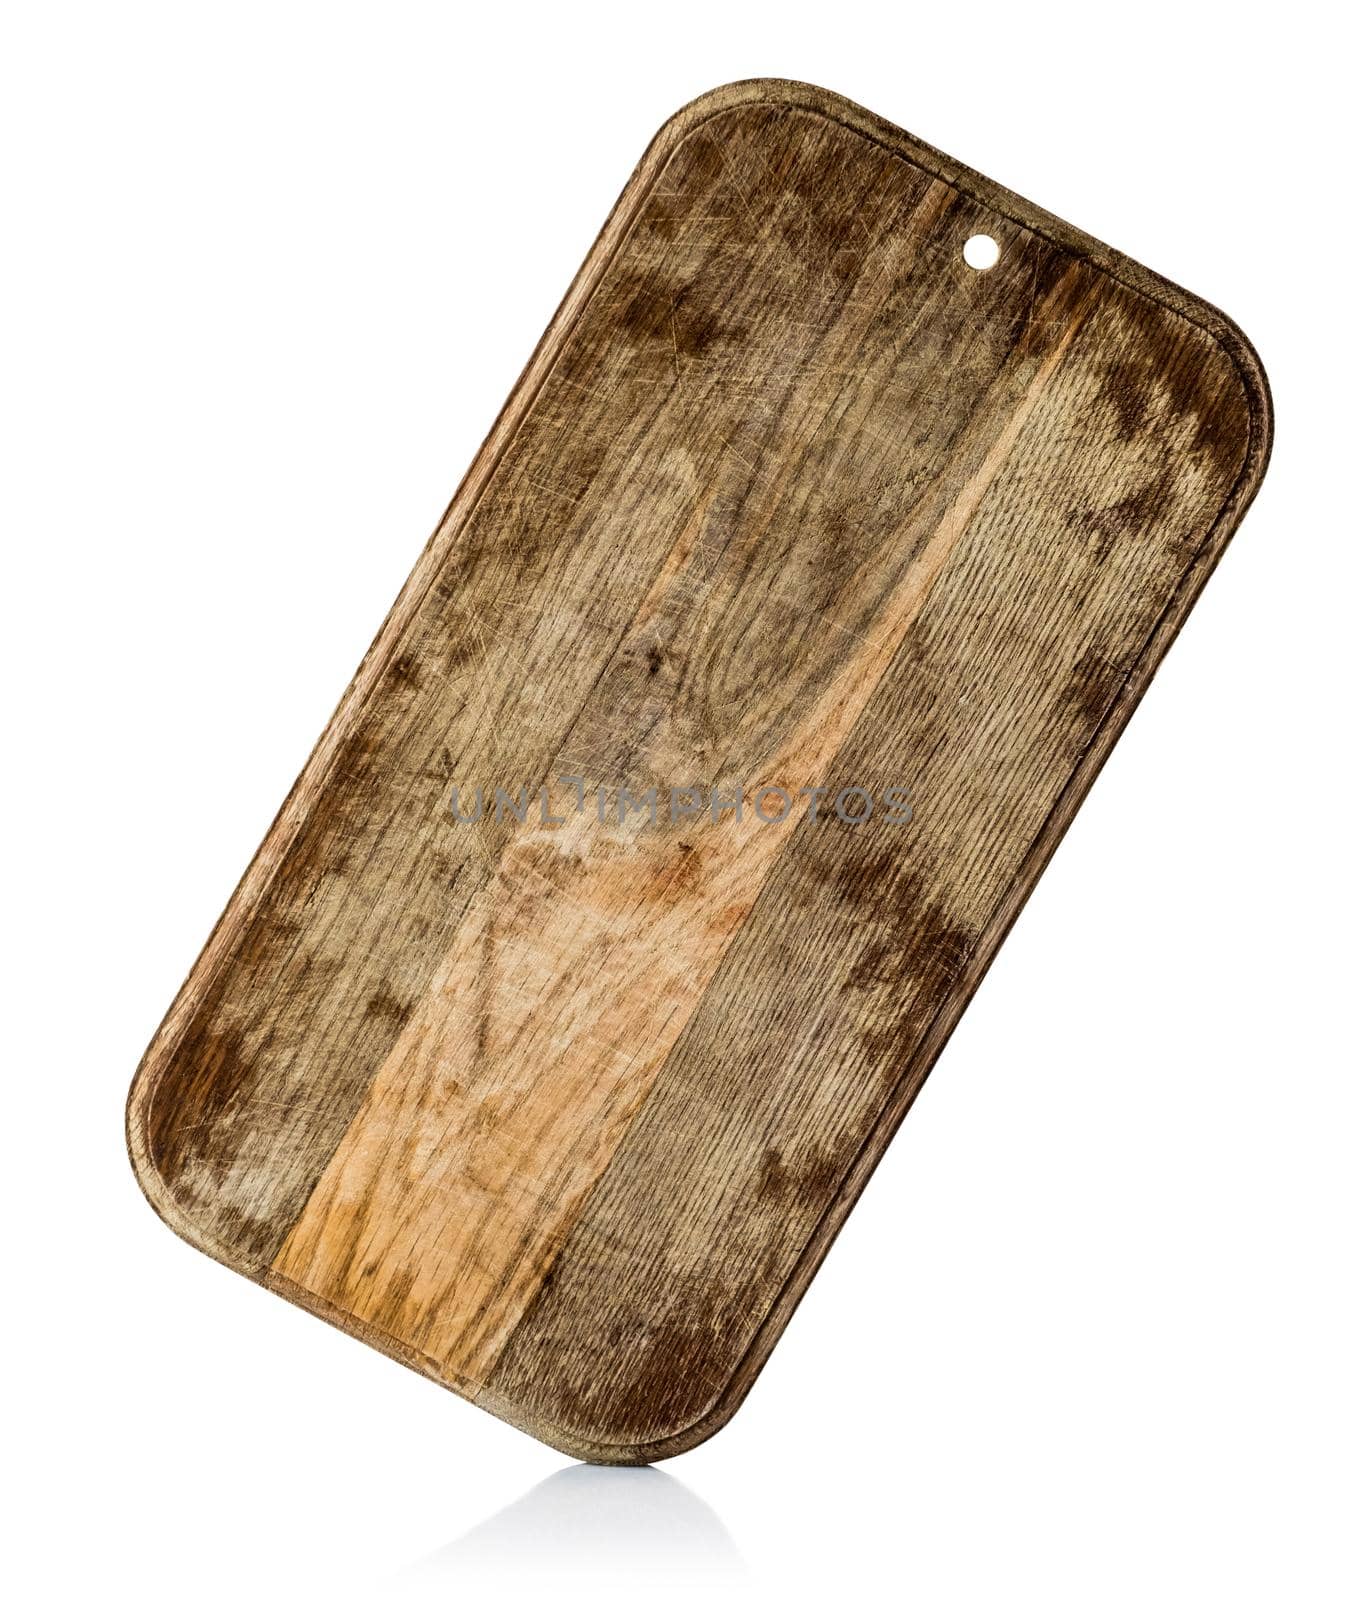 wooden cooking board isolated on a white background. by GekaSkr